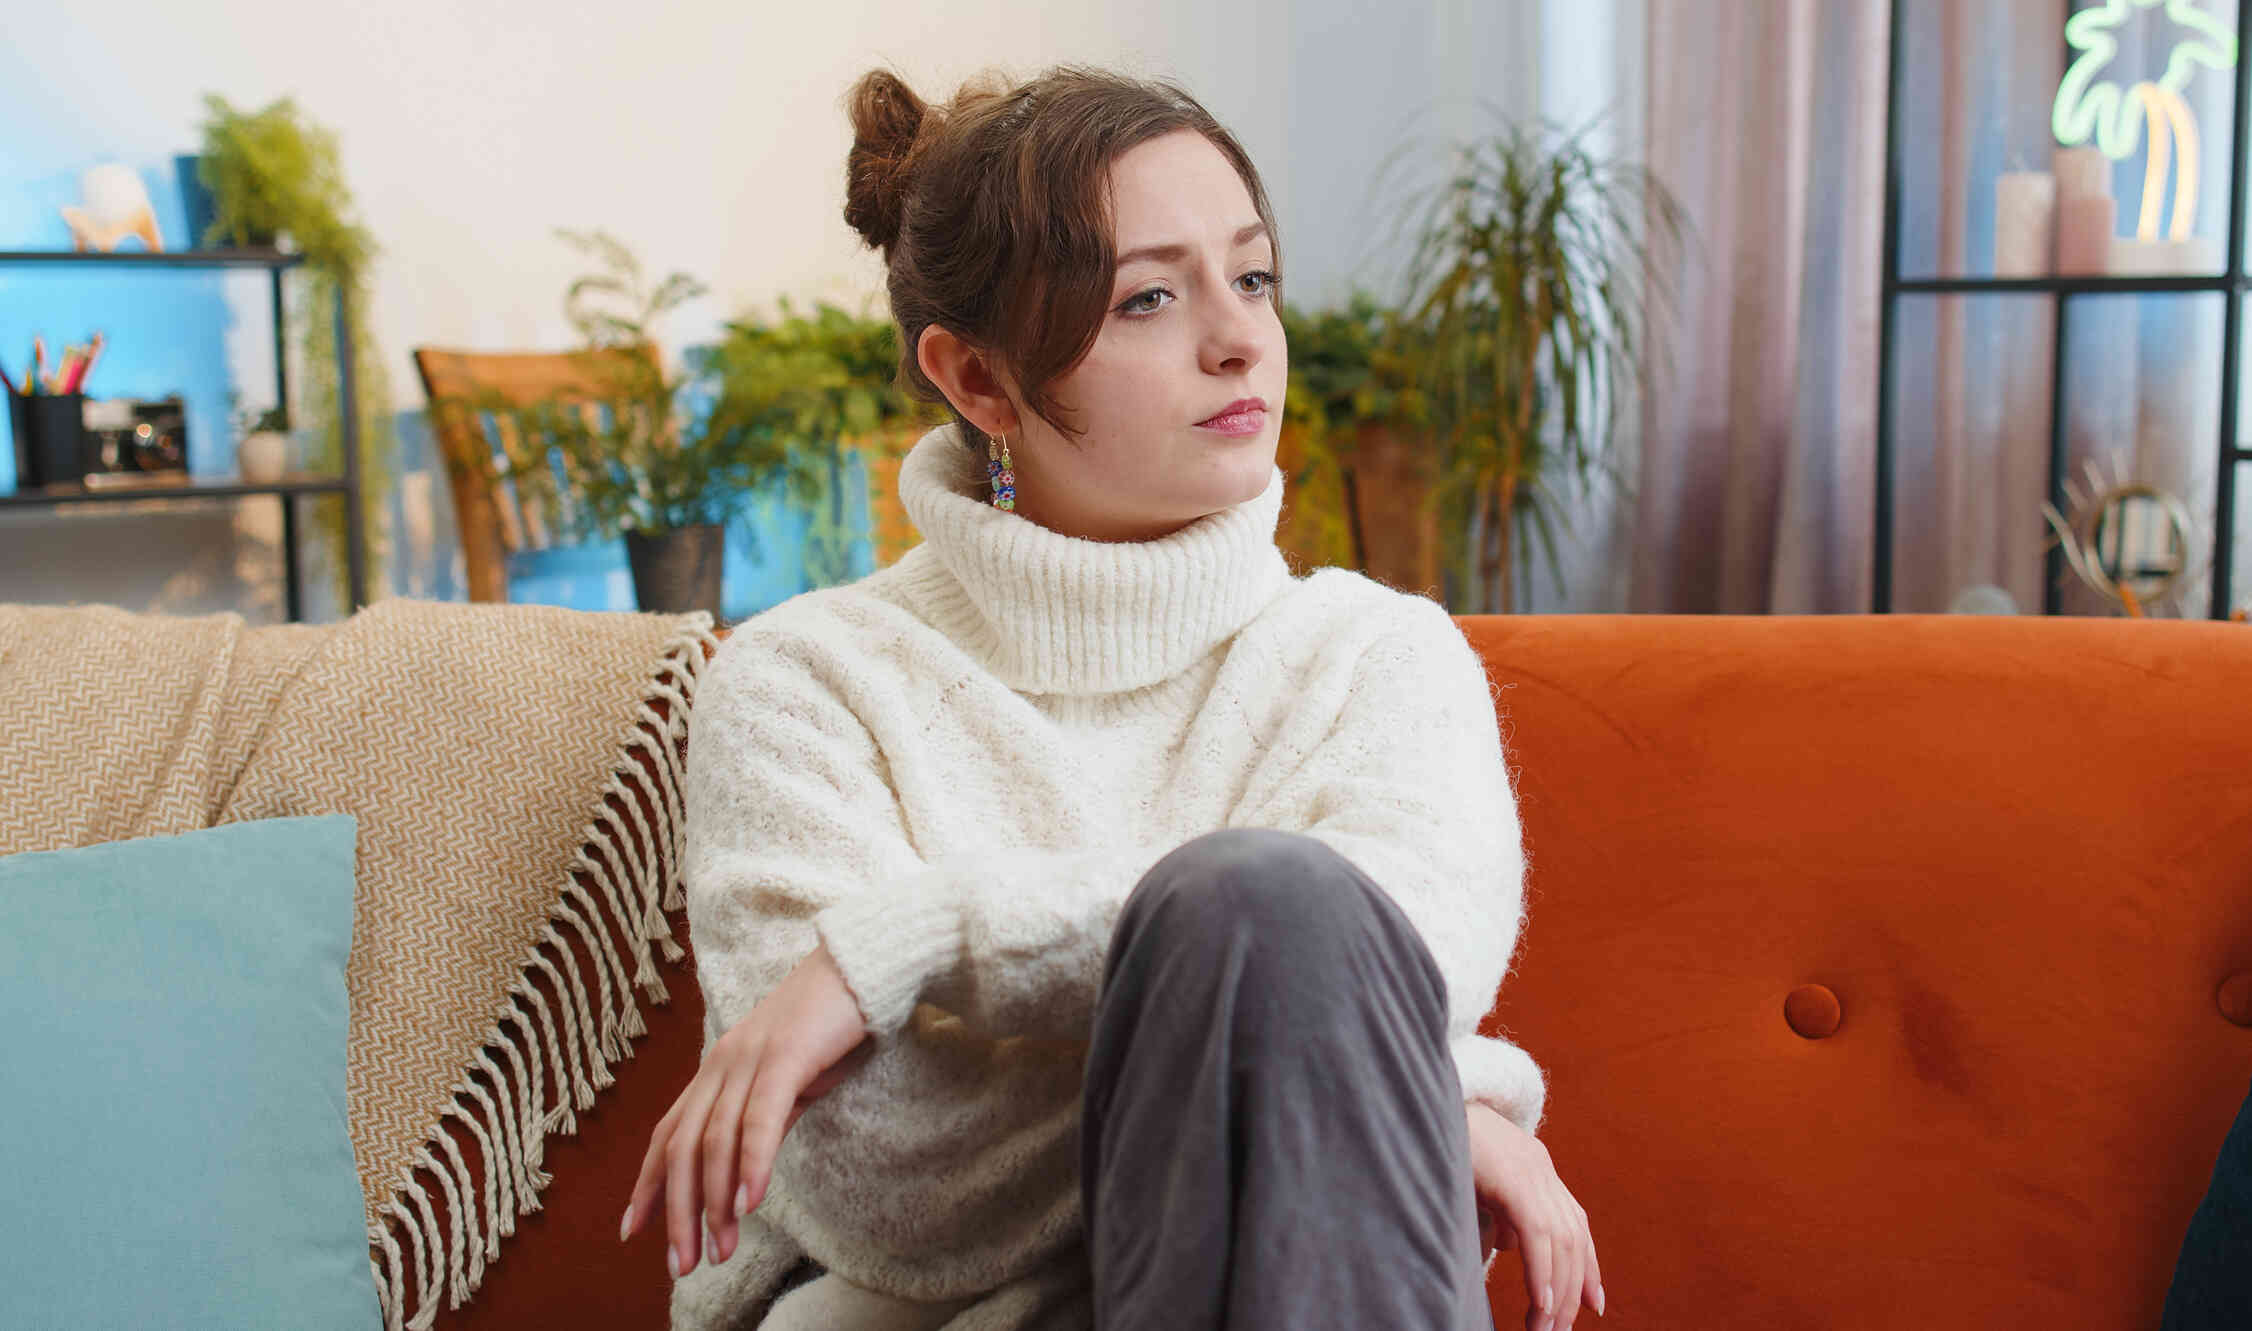 A woman in a white turleneck sweater sits on the couch and gazes off while deep in thought.